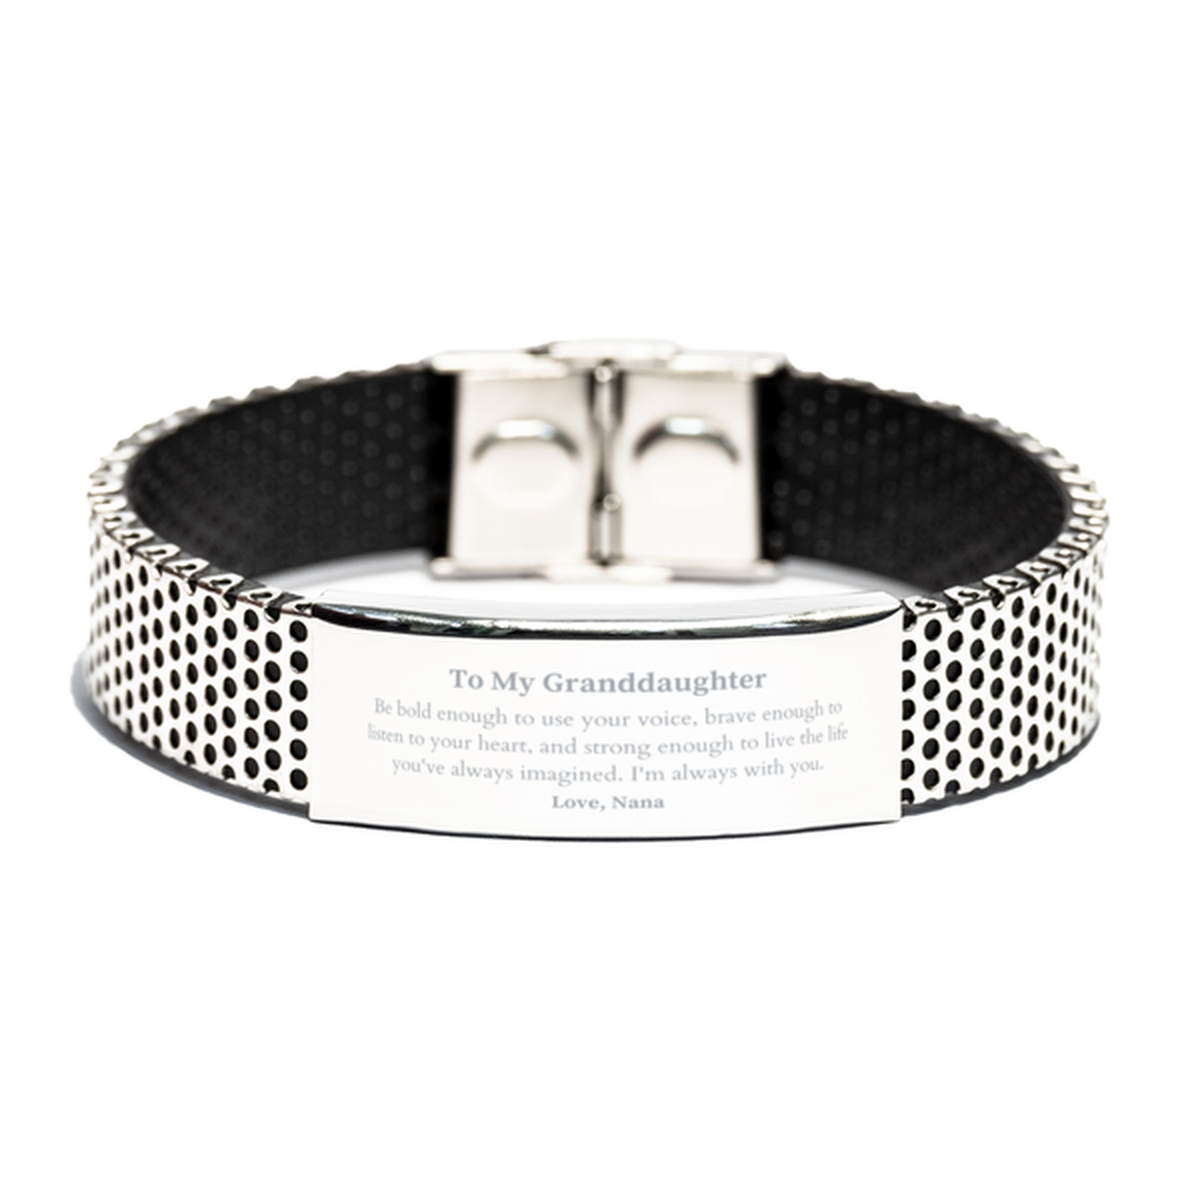 Keepsake Granddaughter Stainless Steel Bracelet Gift Idea Graduation Christmas Birthday Granddaughter from Nana, Granddaughter Be bold enough to use your voice, brave enough to listen to your heart. Love, Nana